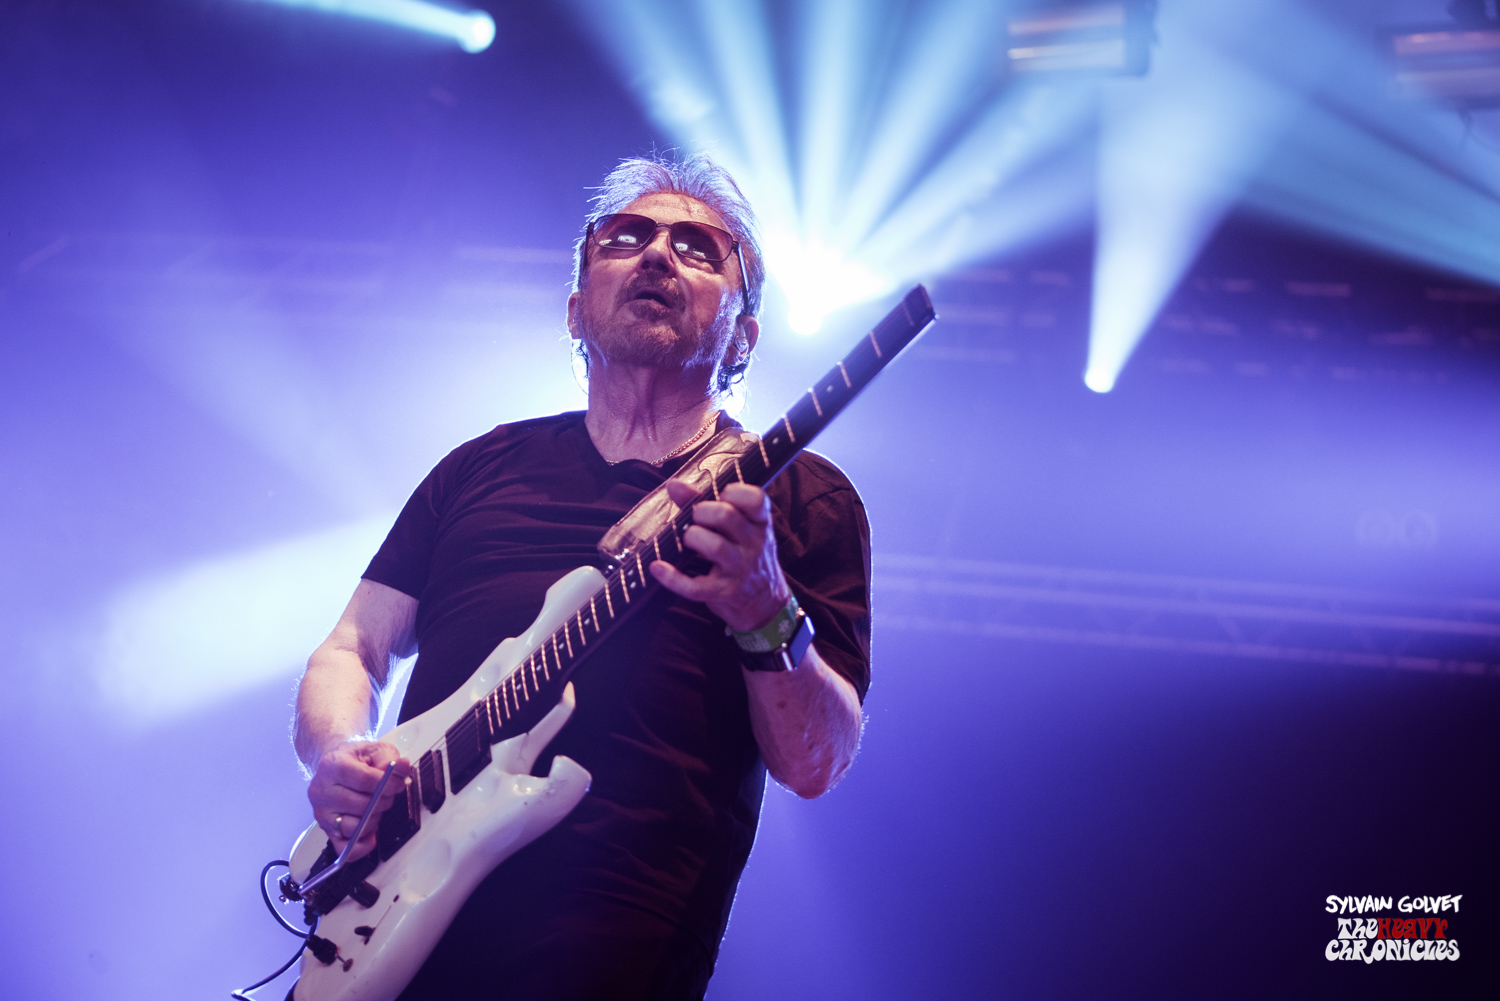 HELLFEST-2017-DIMANCHE-05-BLUE-OYSTER-CULT-2